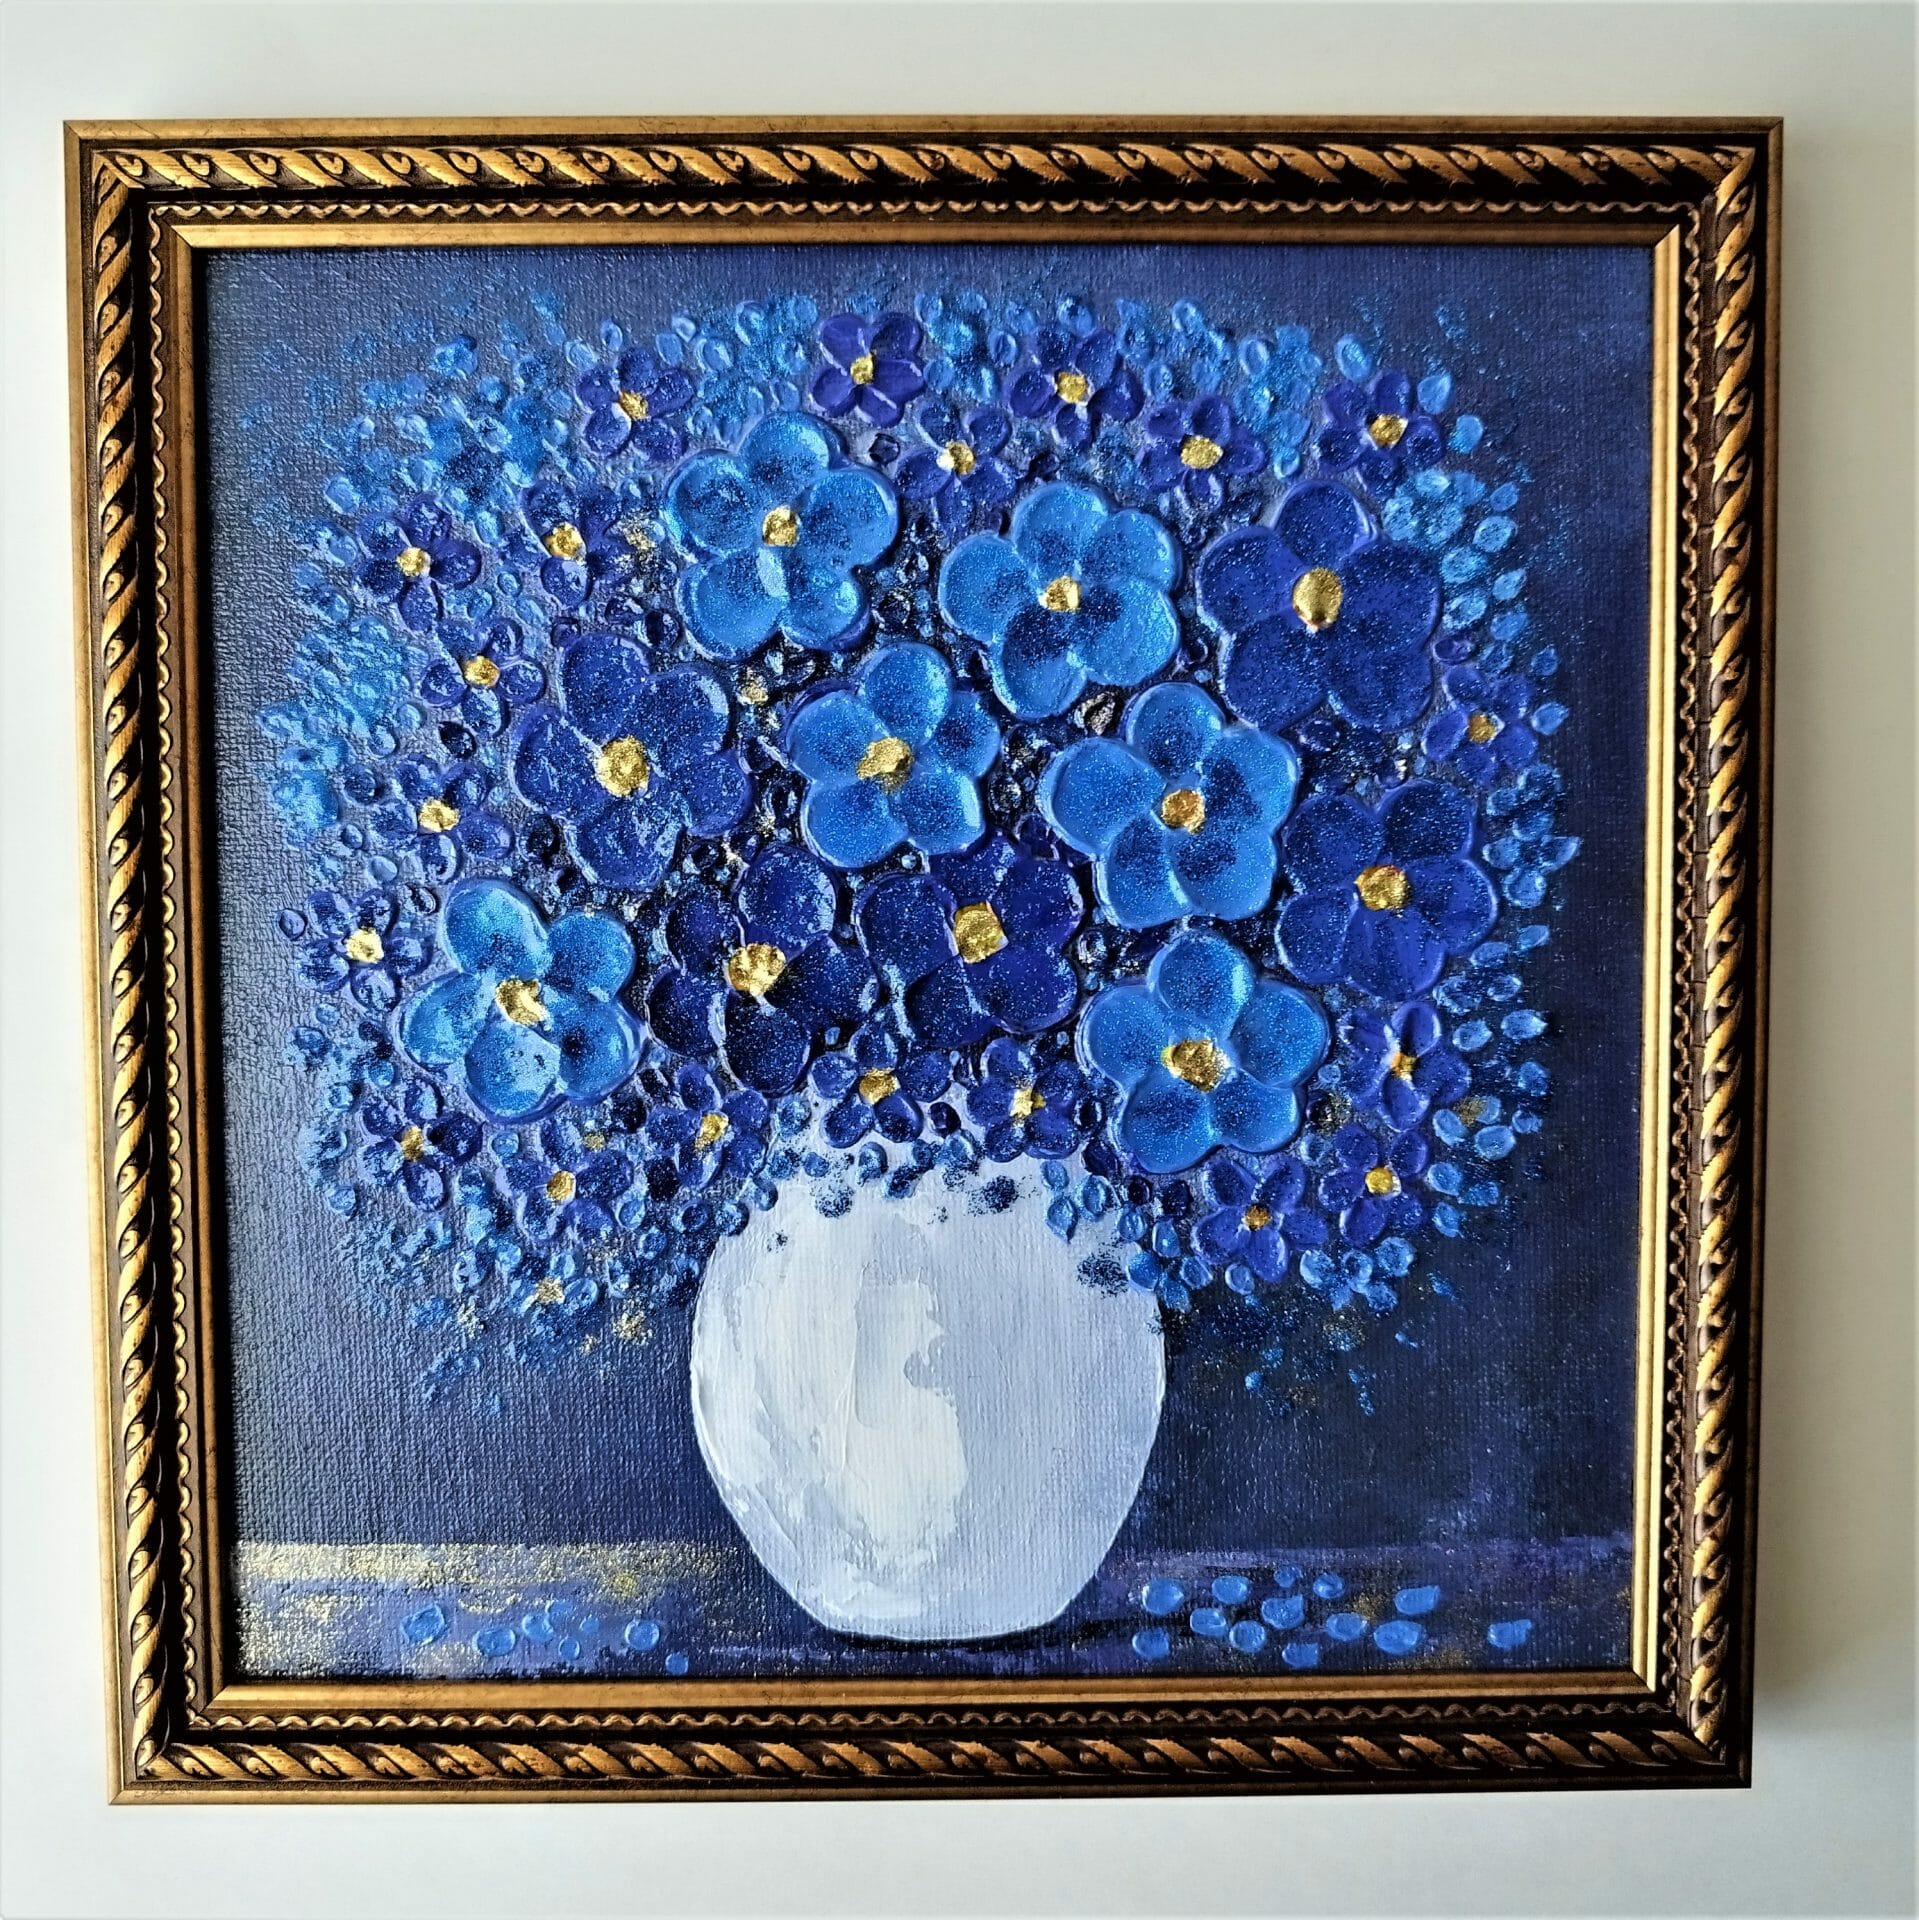 https://s3.eu-central-1.wasabisys.com/crealandia.com/wp-content/uploads/2023/04/28121515/palette-knife-painting-floral-art-in-a-frame-bouquet-of-blue-flowers-in-a-vase.jpg